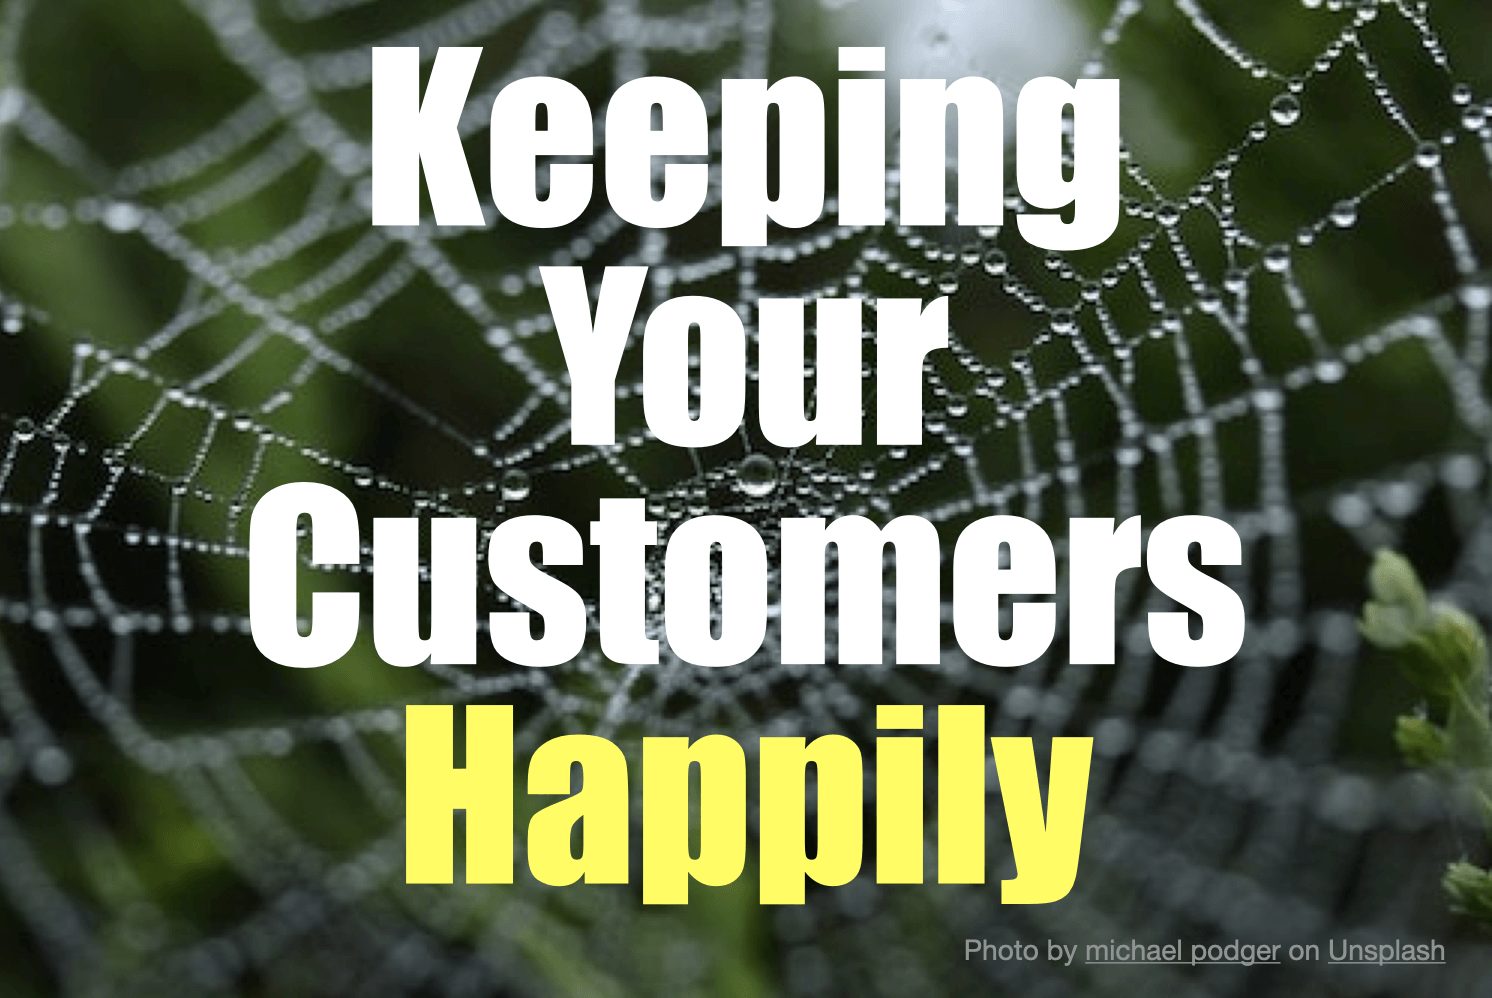 “I Don’t Want You To Leave!” Yes, But Better to Keep Customers Happily